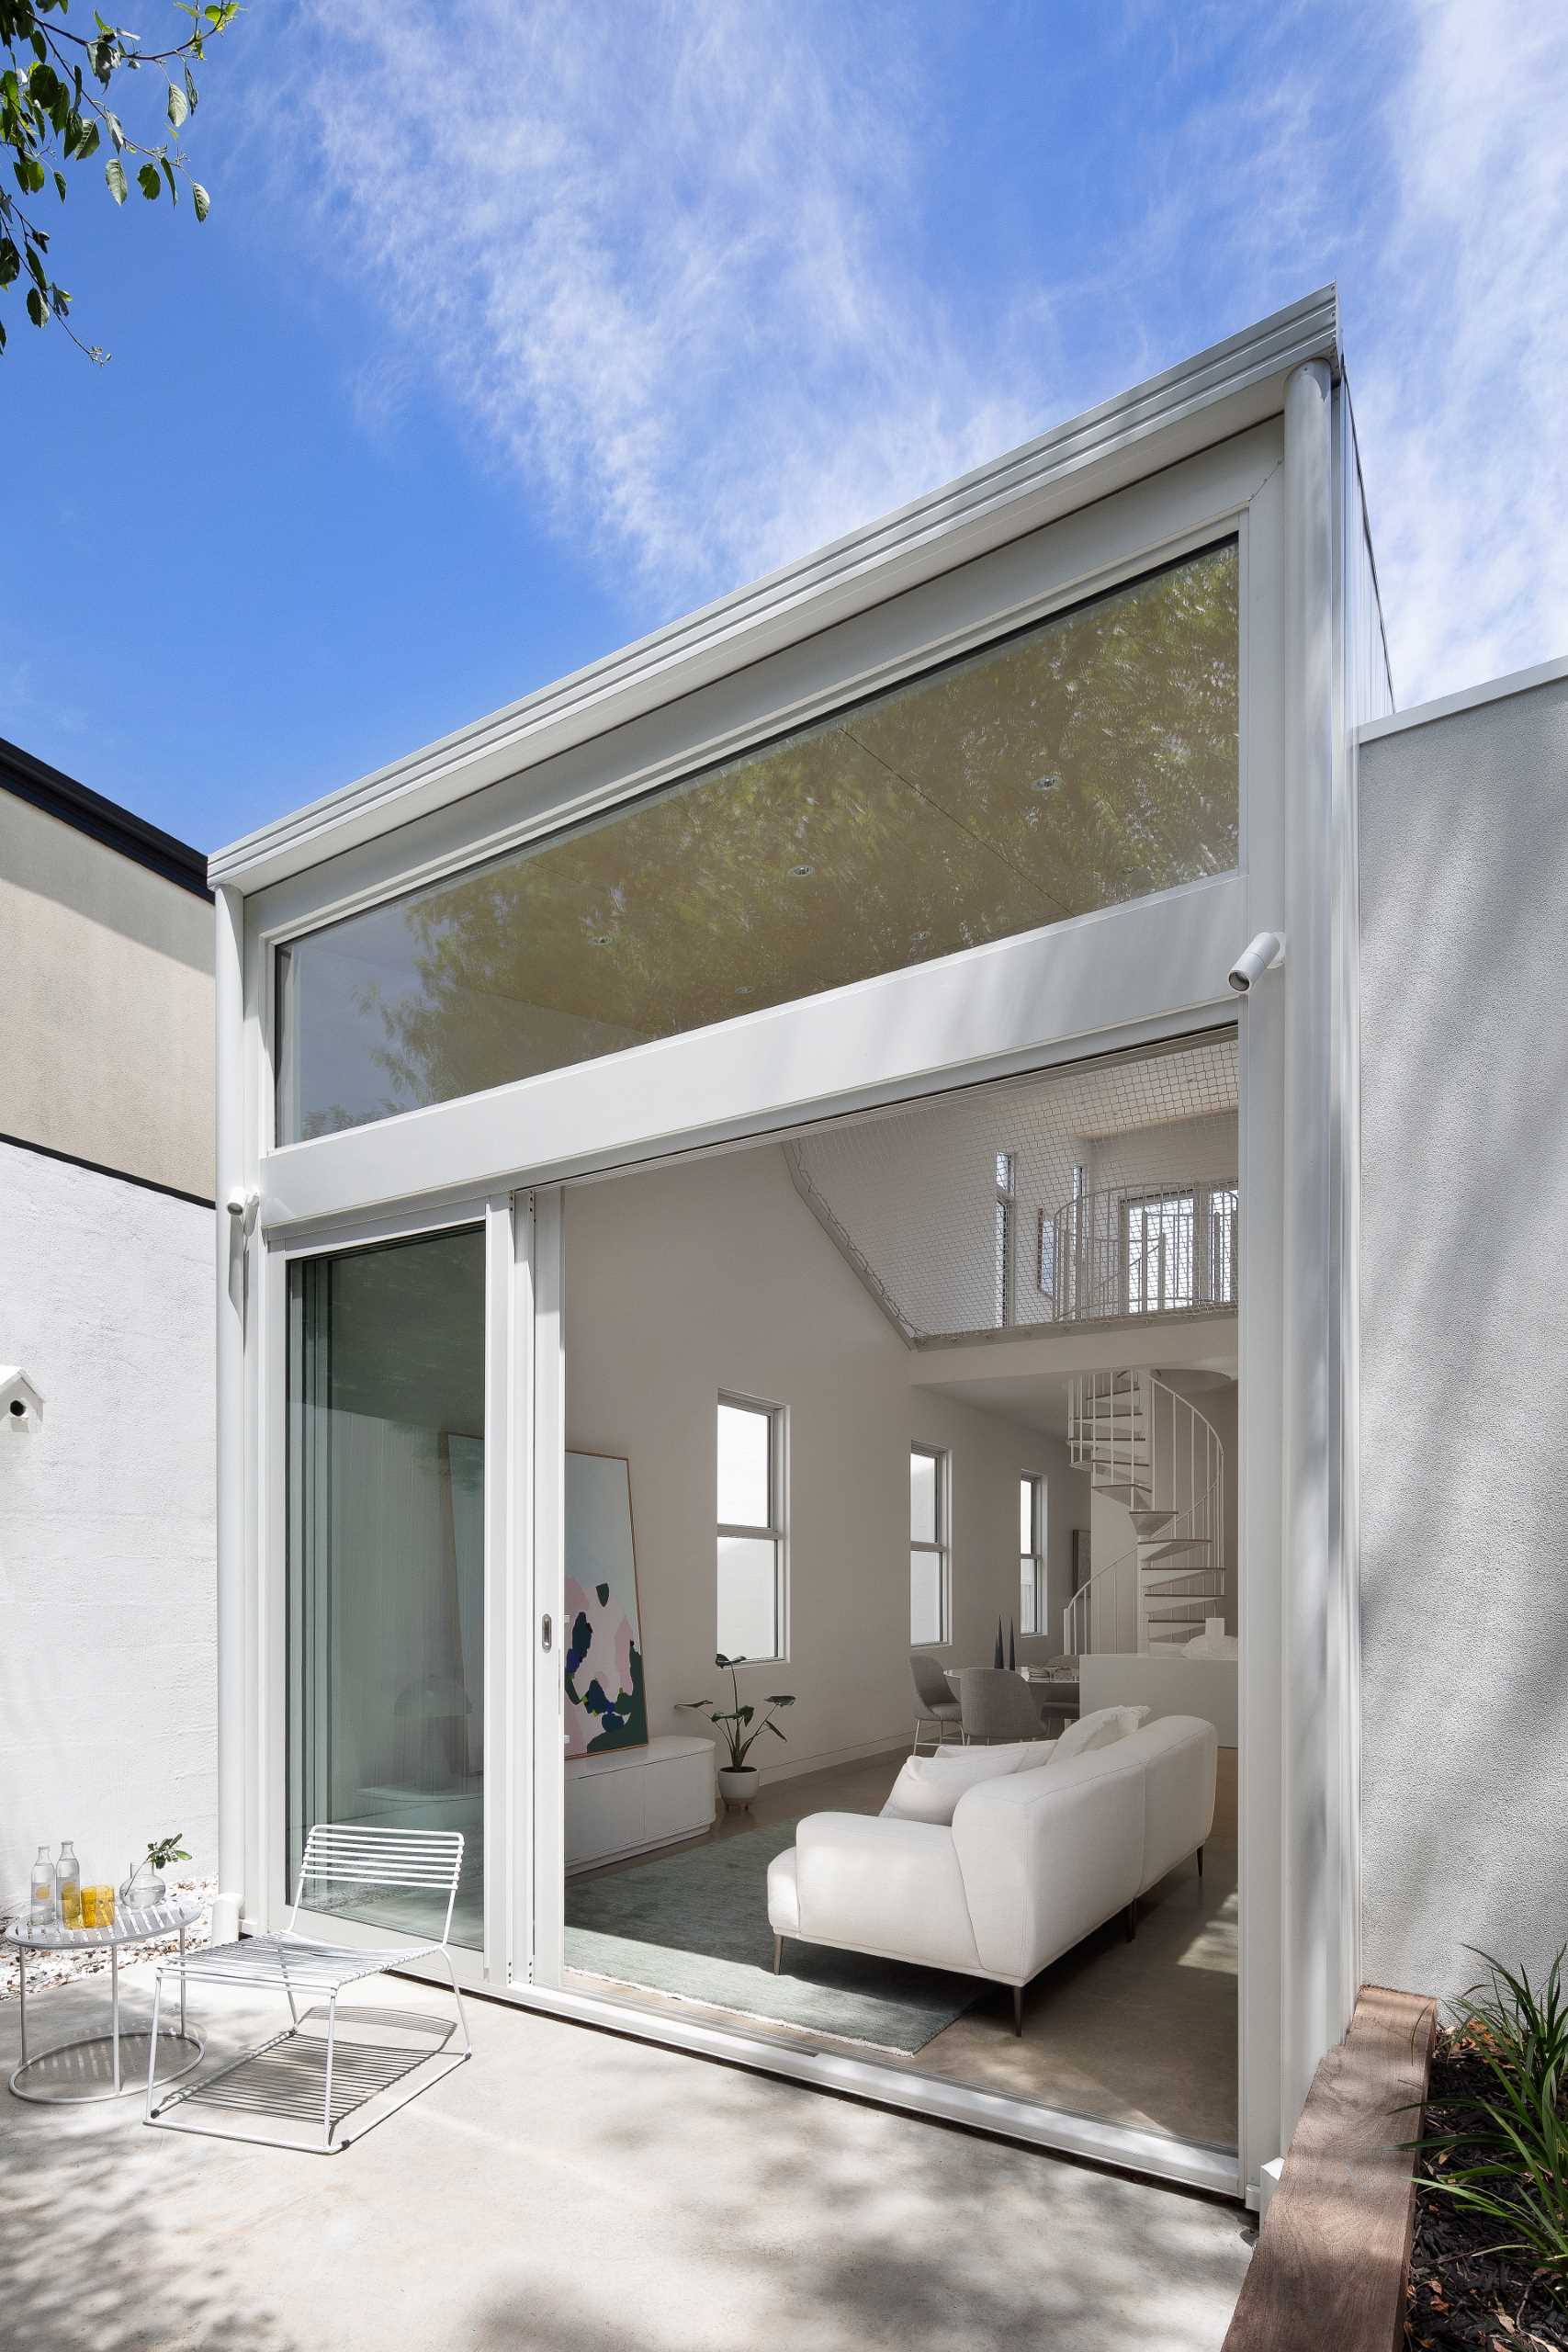 The double-height rear extension has sliding glass doors that connect the living room to the yard.